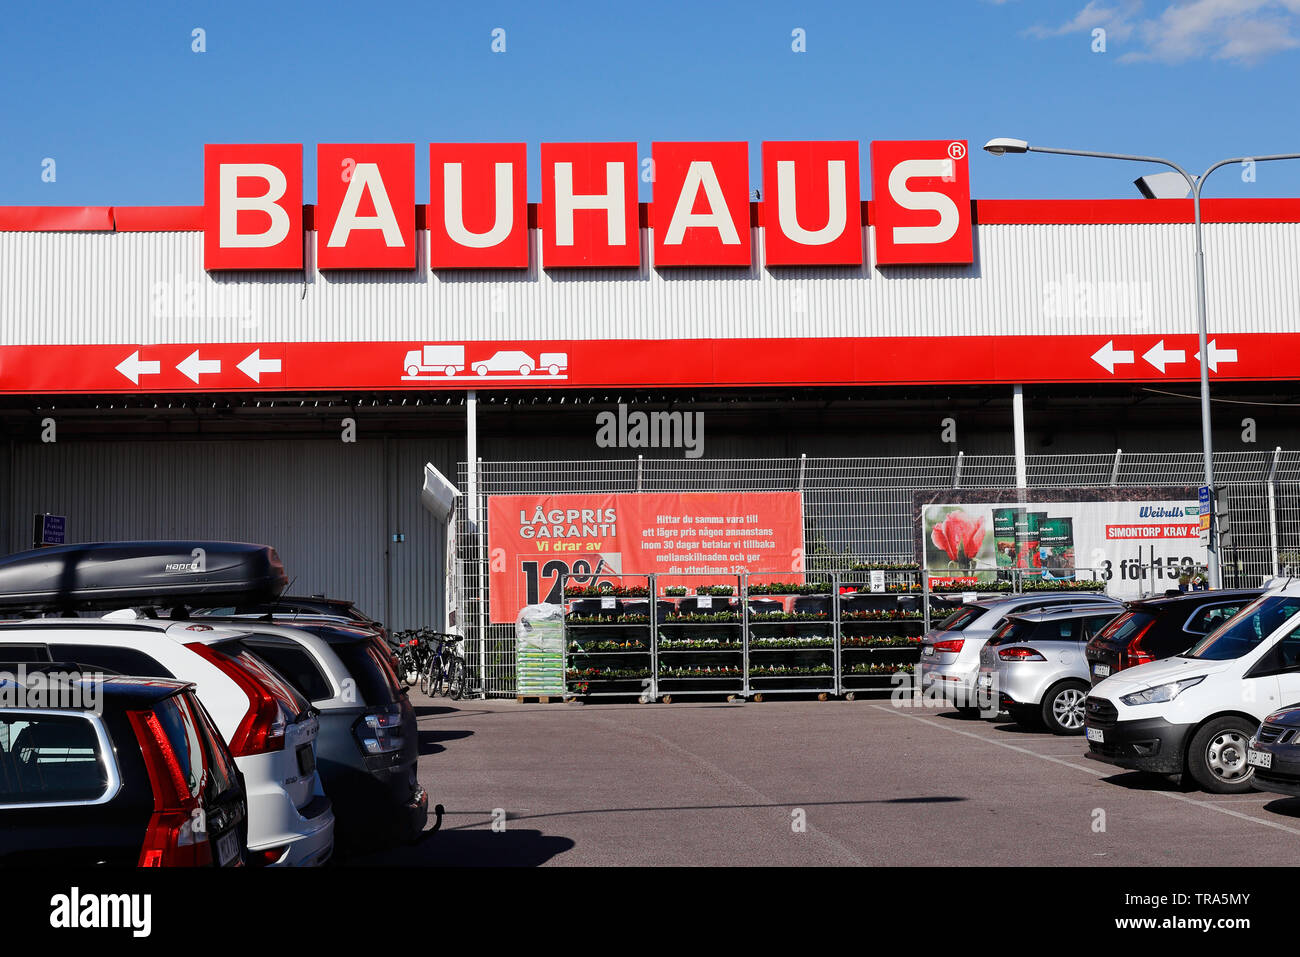 Stockholm, Sweden - May 31, 2019: Bauhaus retail store located in Bromma offering products for home improvement, gardening and workshop. Stock Photo